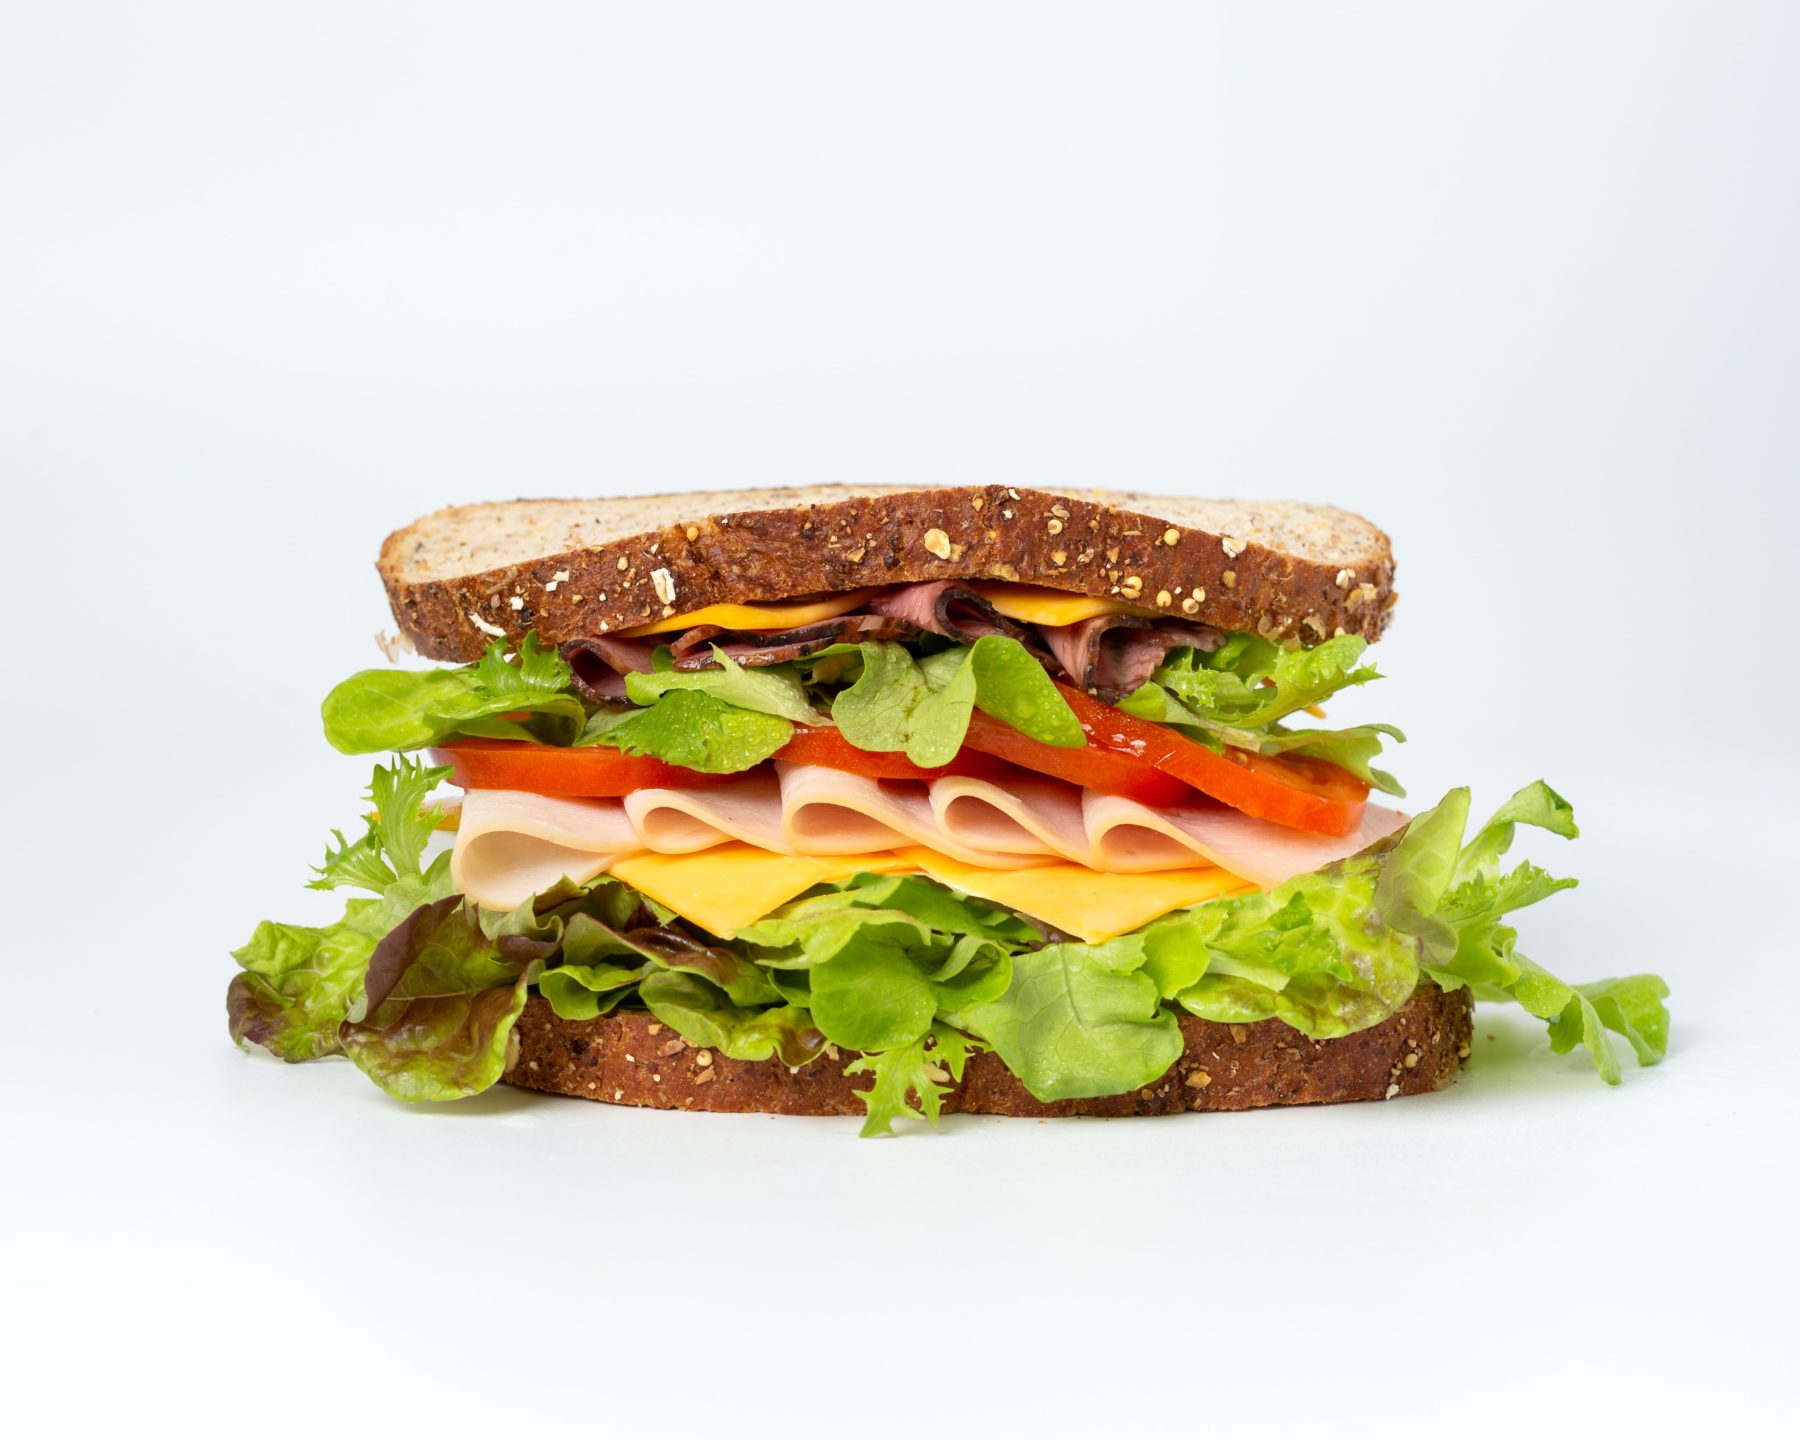 A ham, cheese, tomato and lettuce sandwich against a white background.